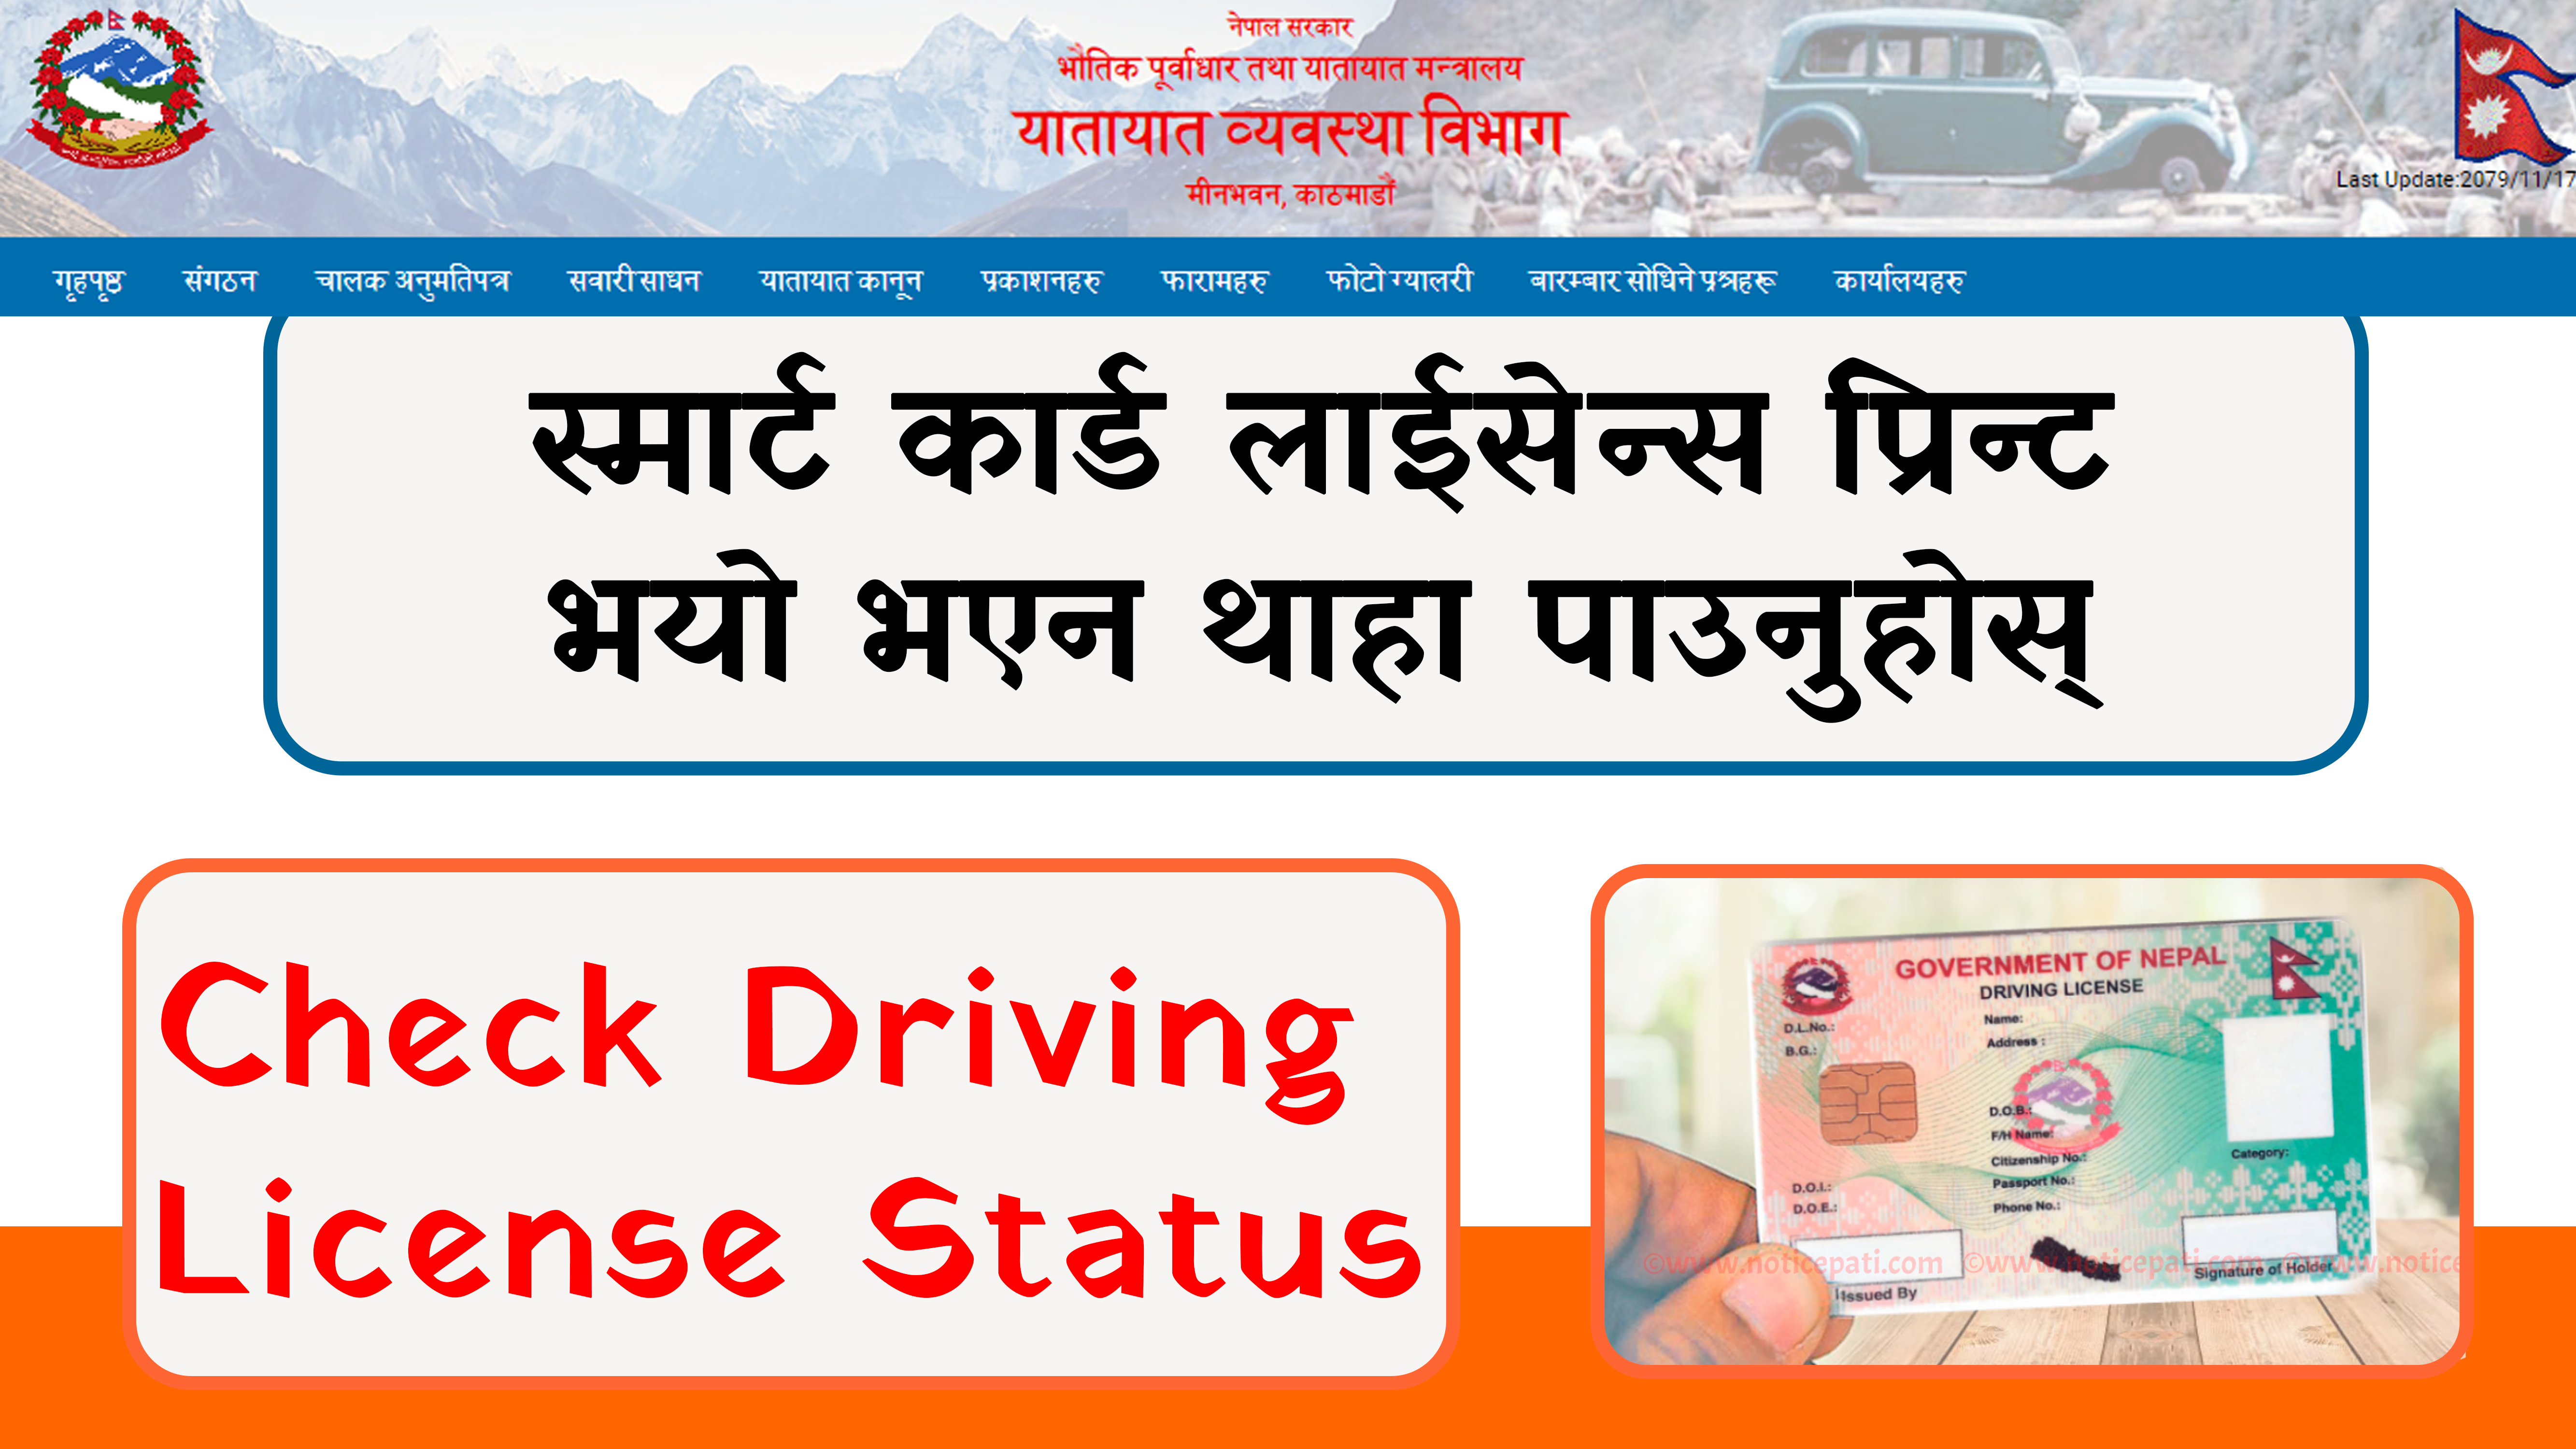 This post discusses how to check driving license print status through SMS and smart driving license print status via website issued by DoTM.